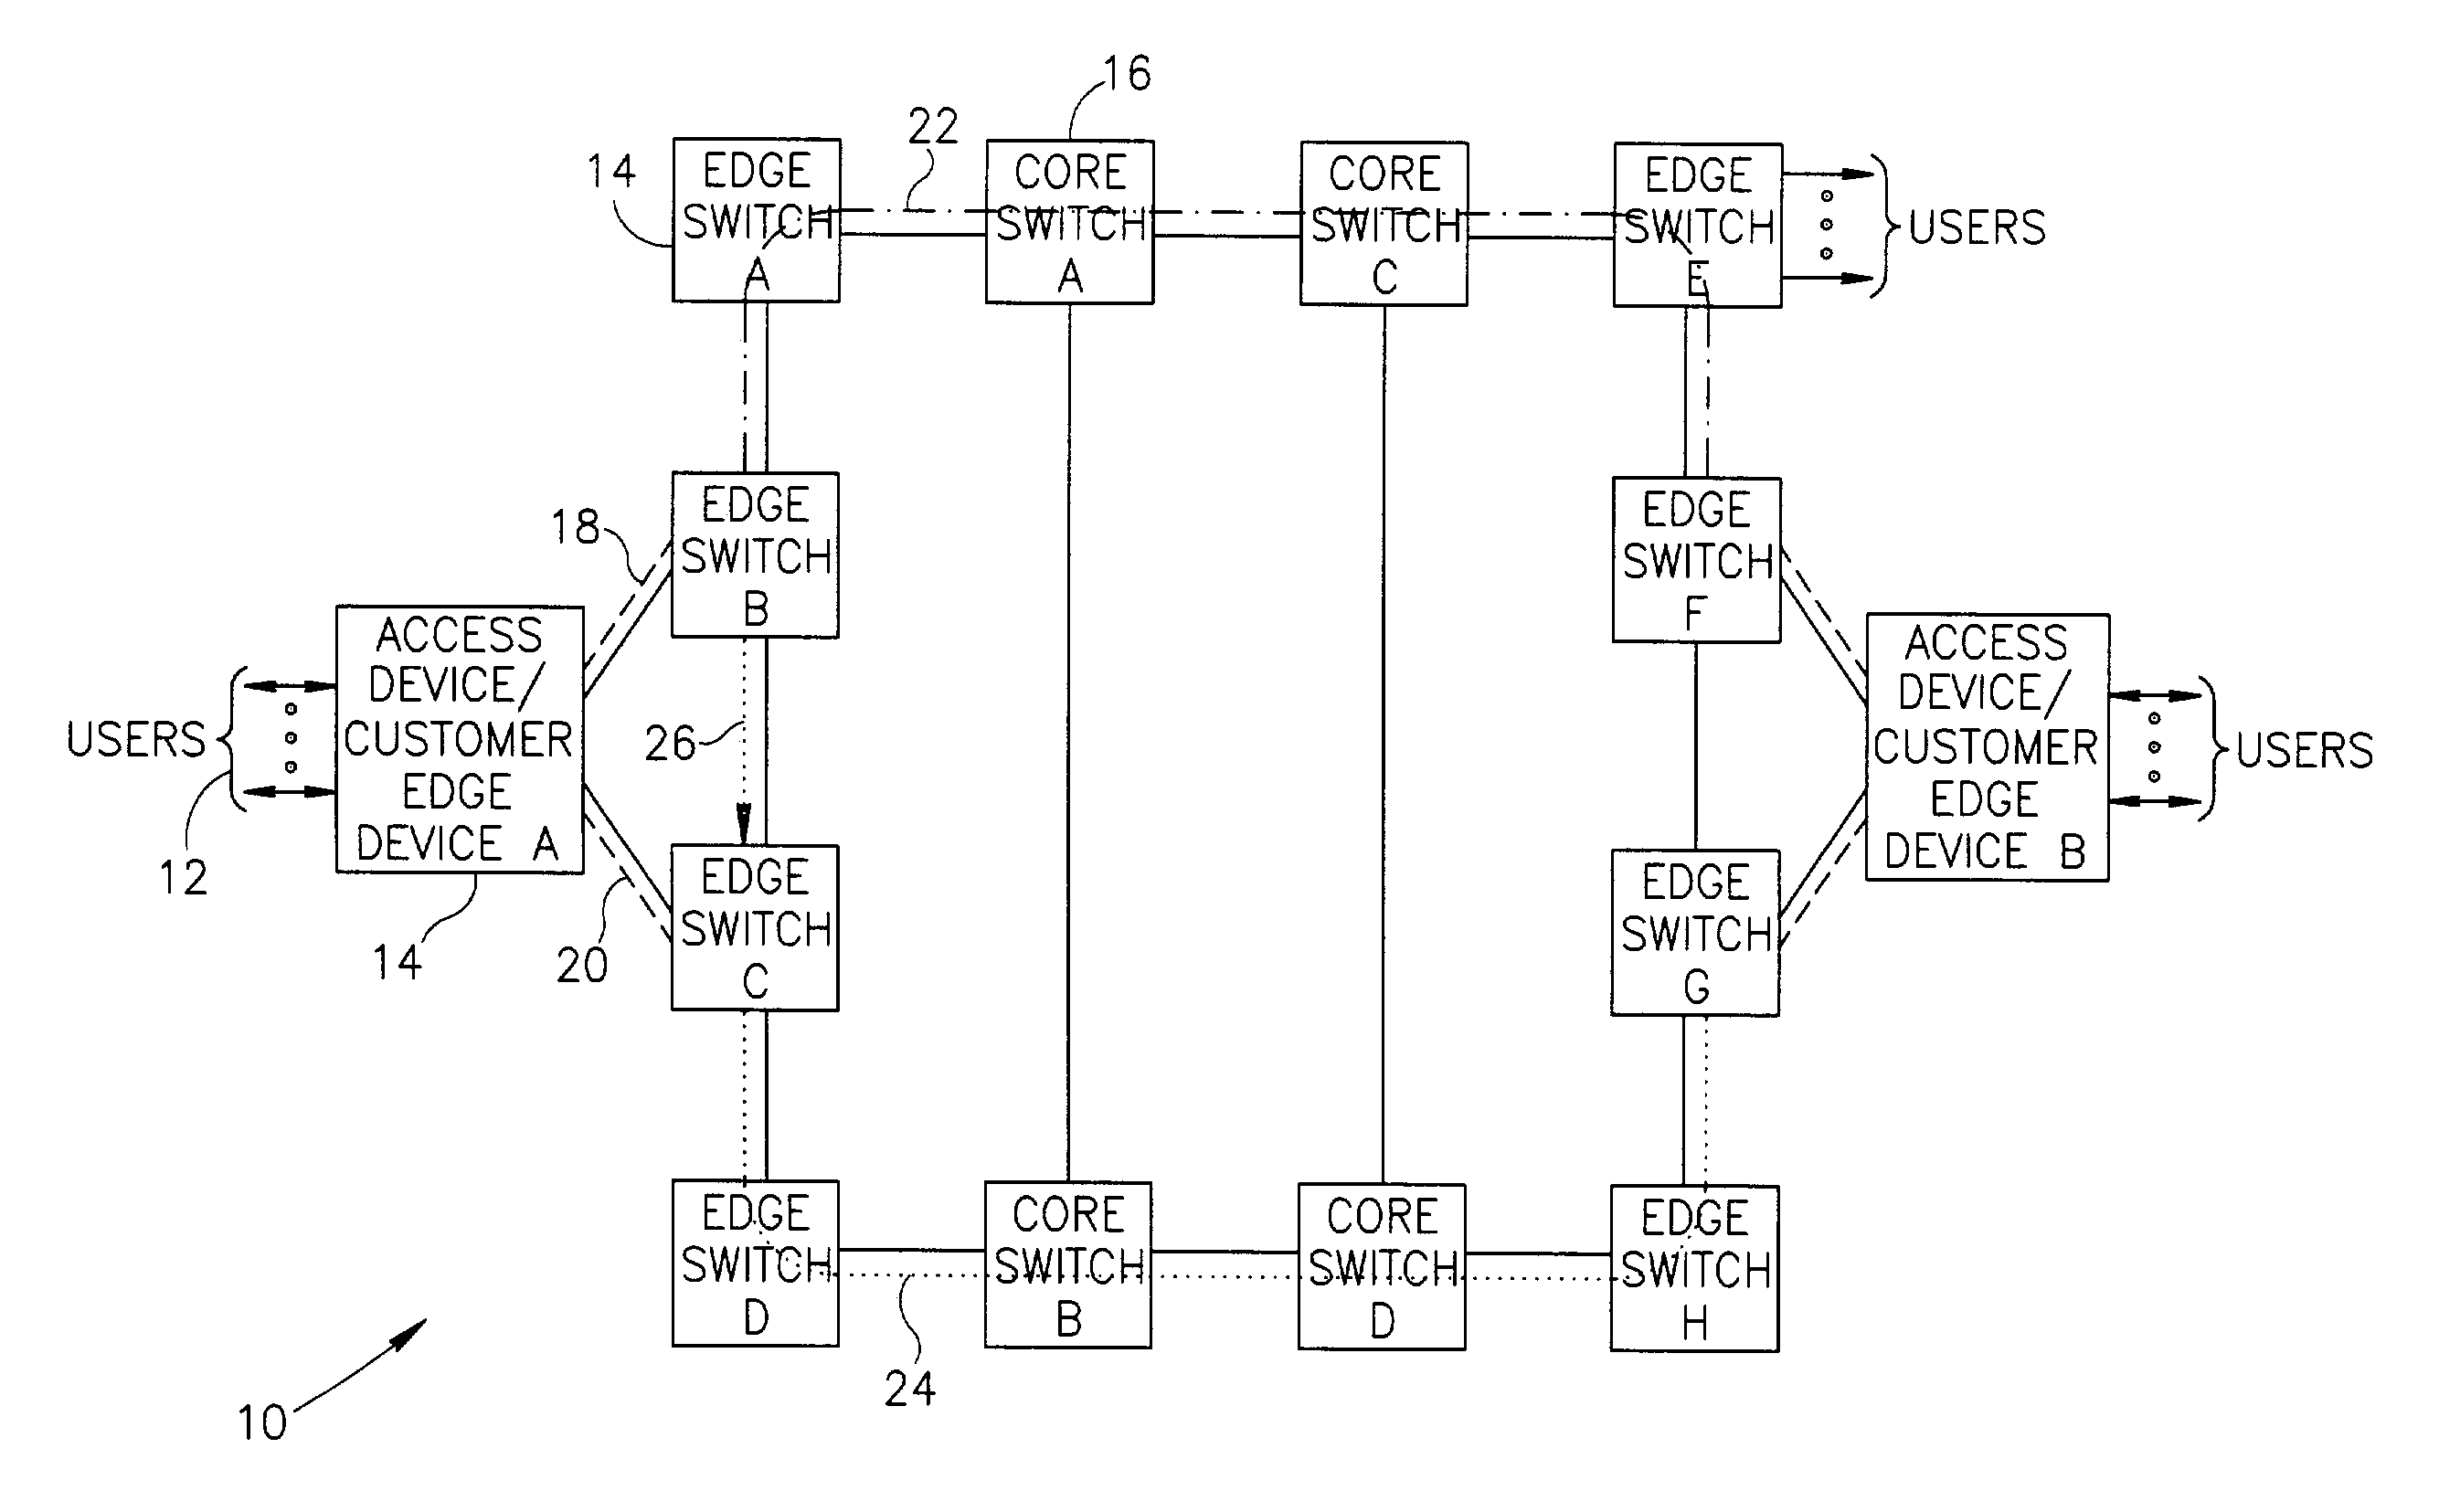 Connection protection mechanism for dual homed access, aggregation and customer edge devices